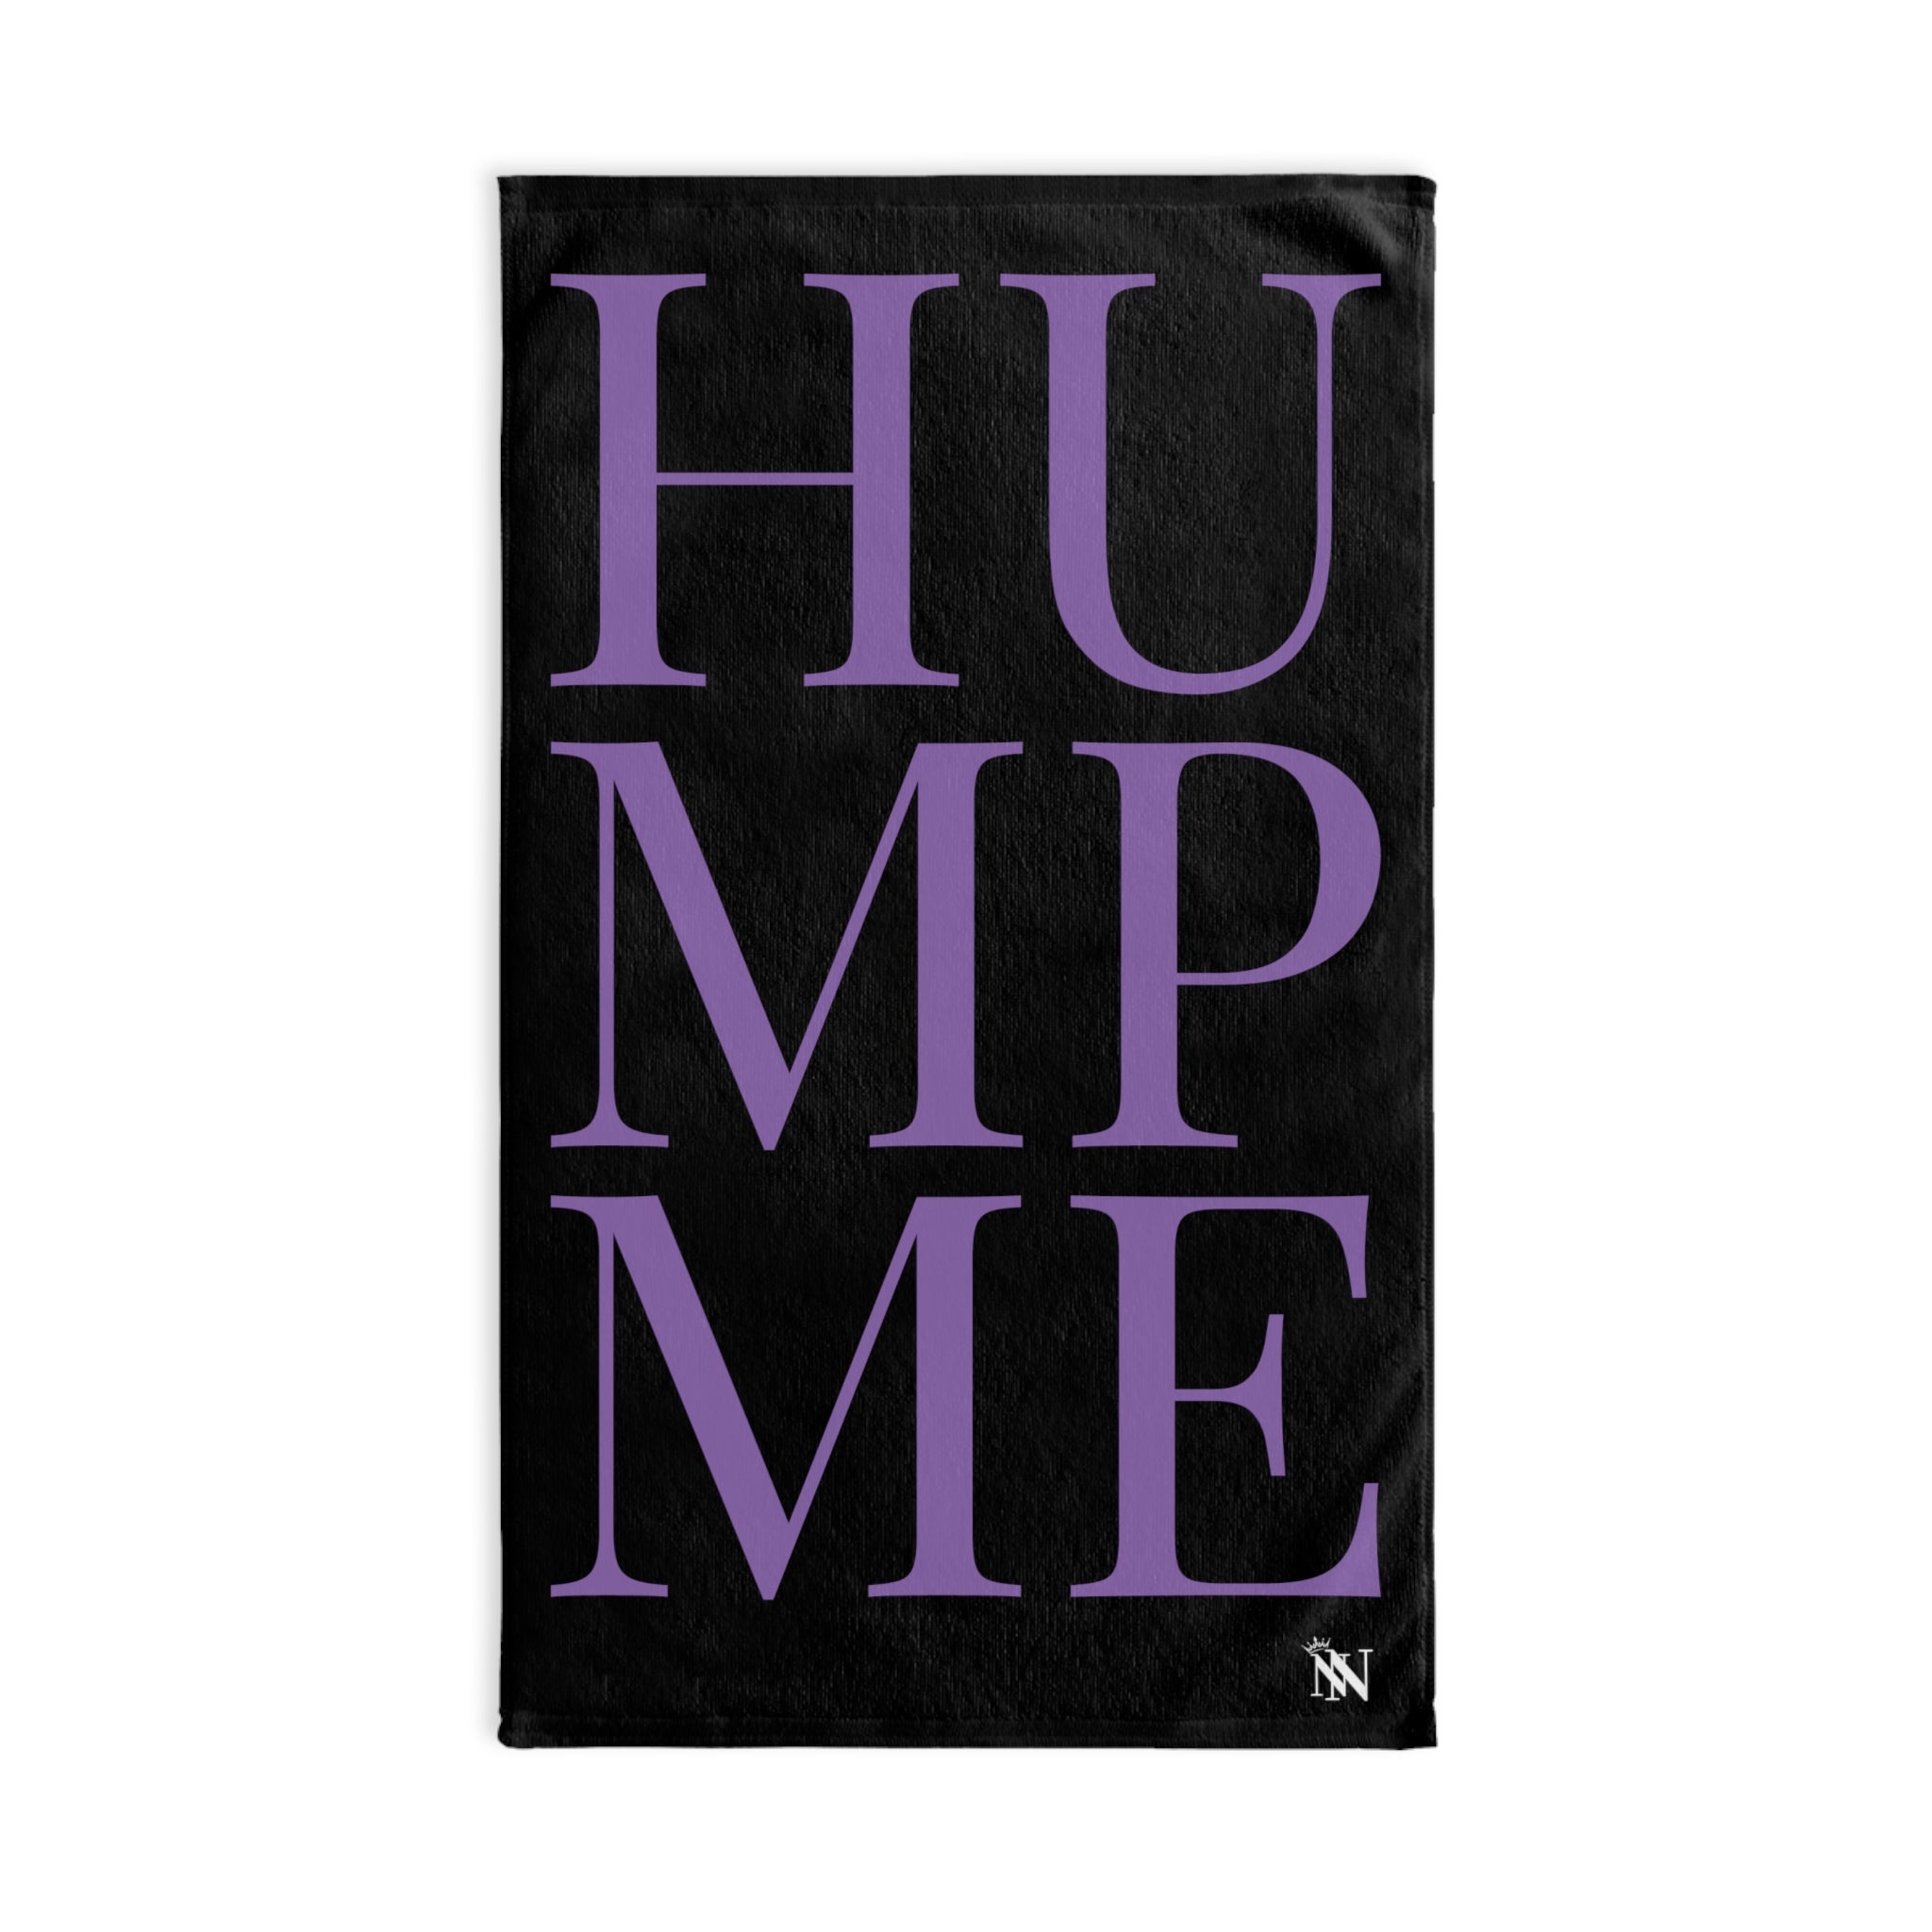 Hump Me Lavendar Black | Sexy Gifts for Boyfriend, Funny Towel Romantic Gift for Wedding Couple Fiance First Year 2nd Anniversary Valentines, Party Gag Gifts, Joke Humor Cloth for Husband Men BF NECTAR NAPKINS